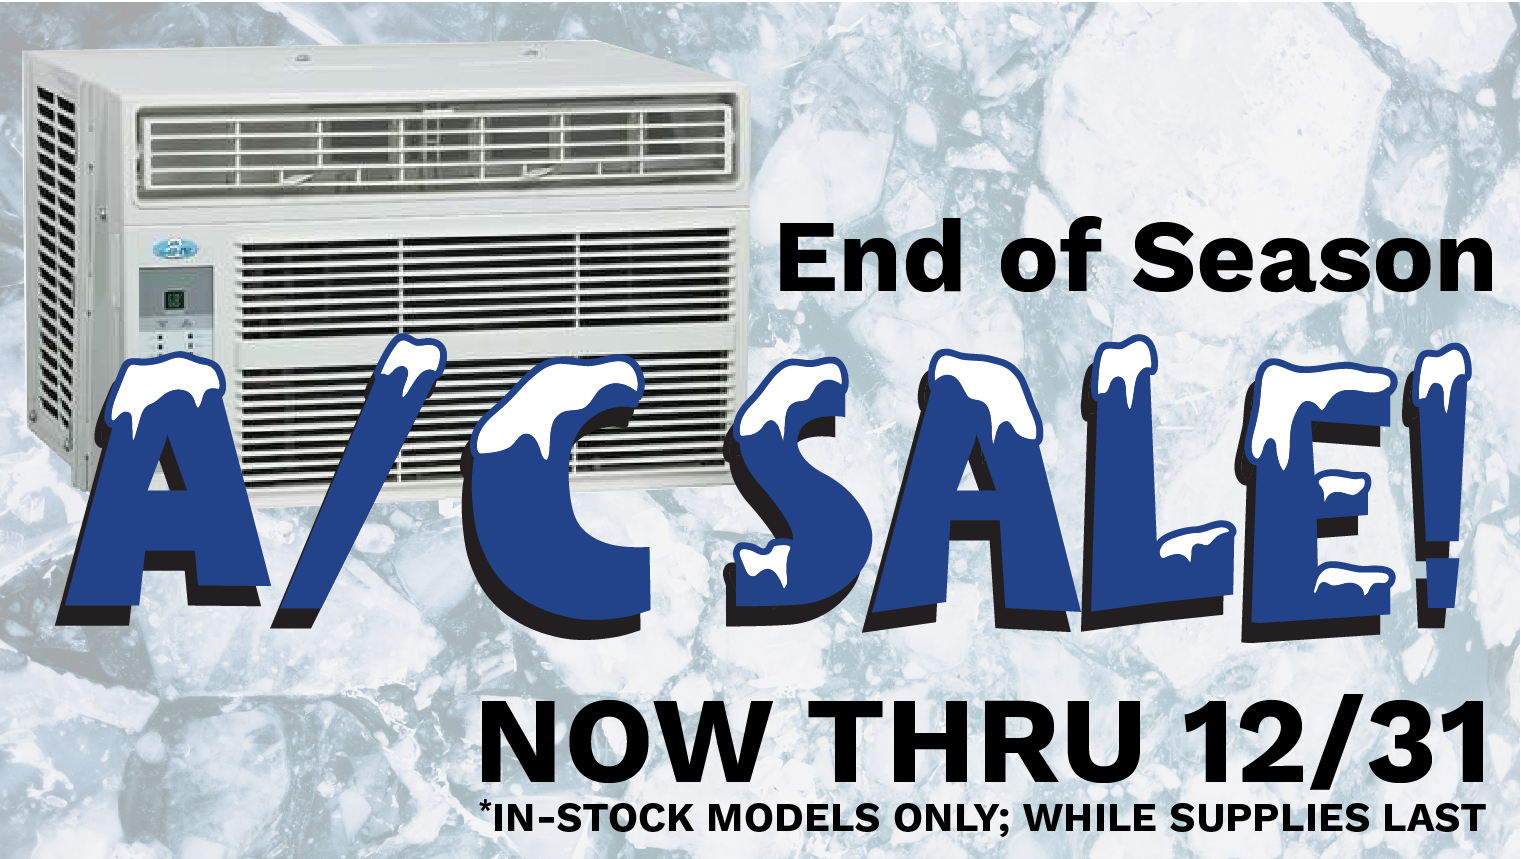 End of Season Sale on Air Conditioners